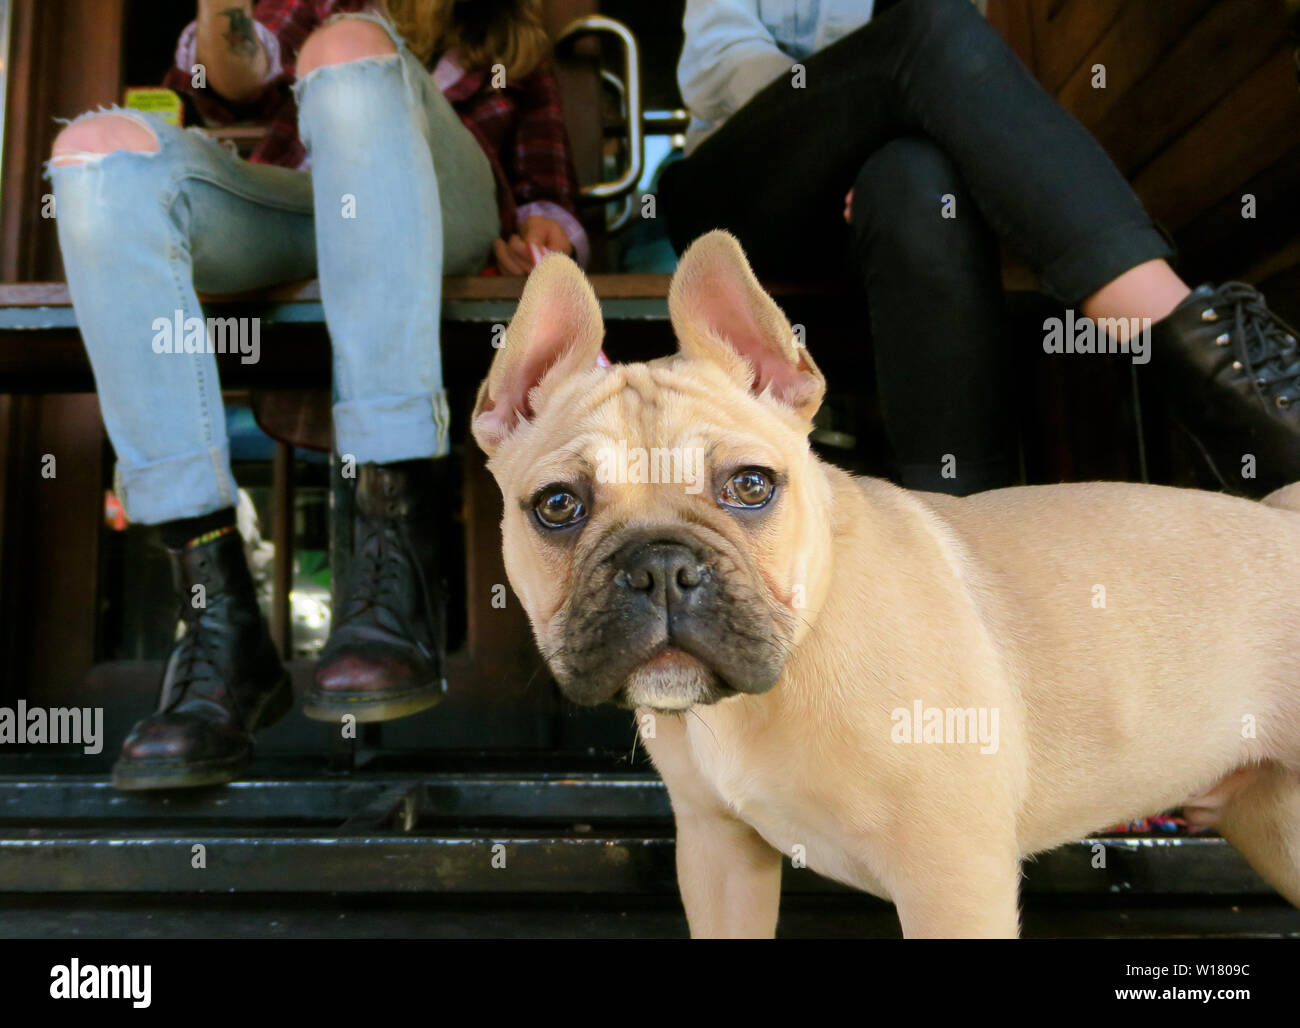 Dogs of Melbourne. A typical scene under a table in a Melbourne street cafe.....A stylish French bulldog among trendy jeans and boots. Stock Photo